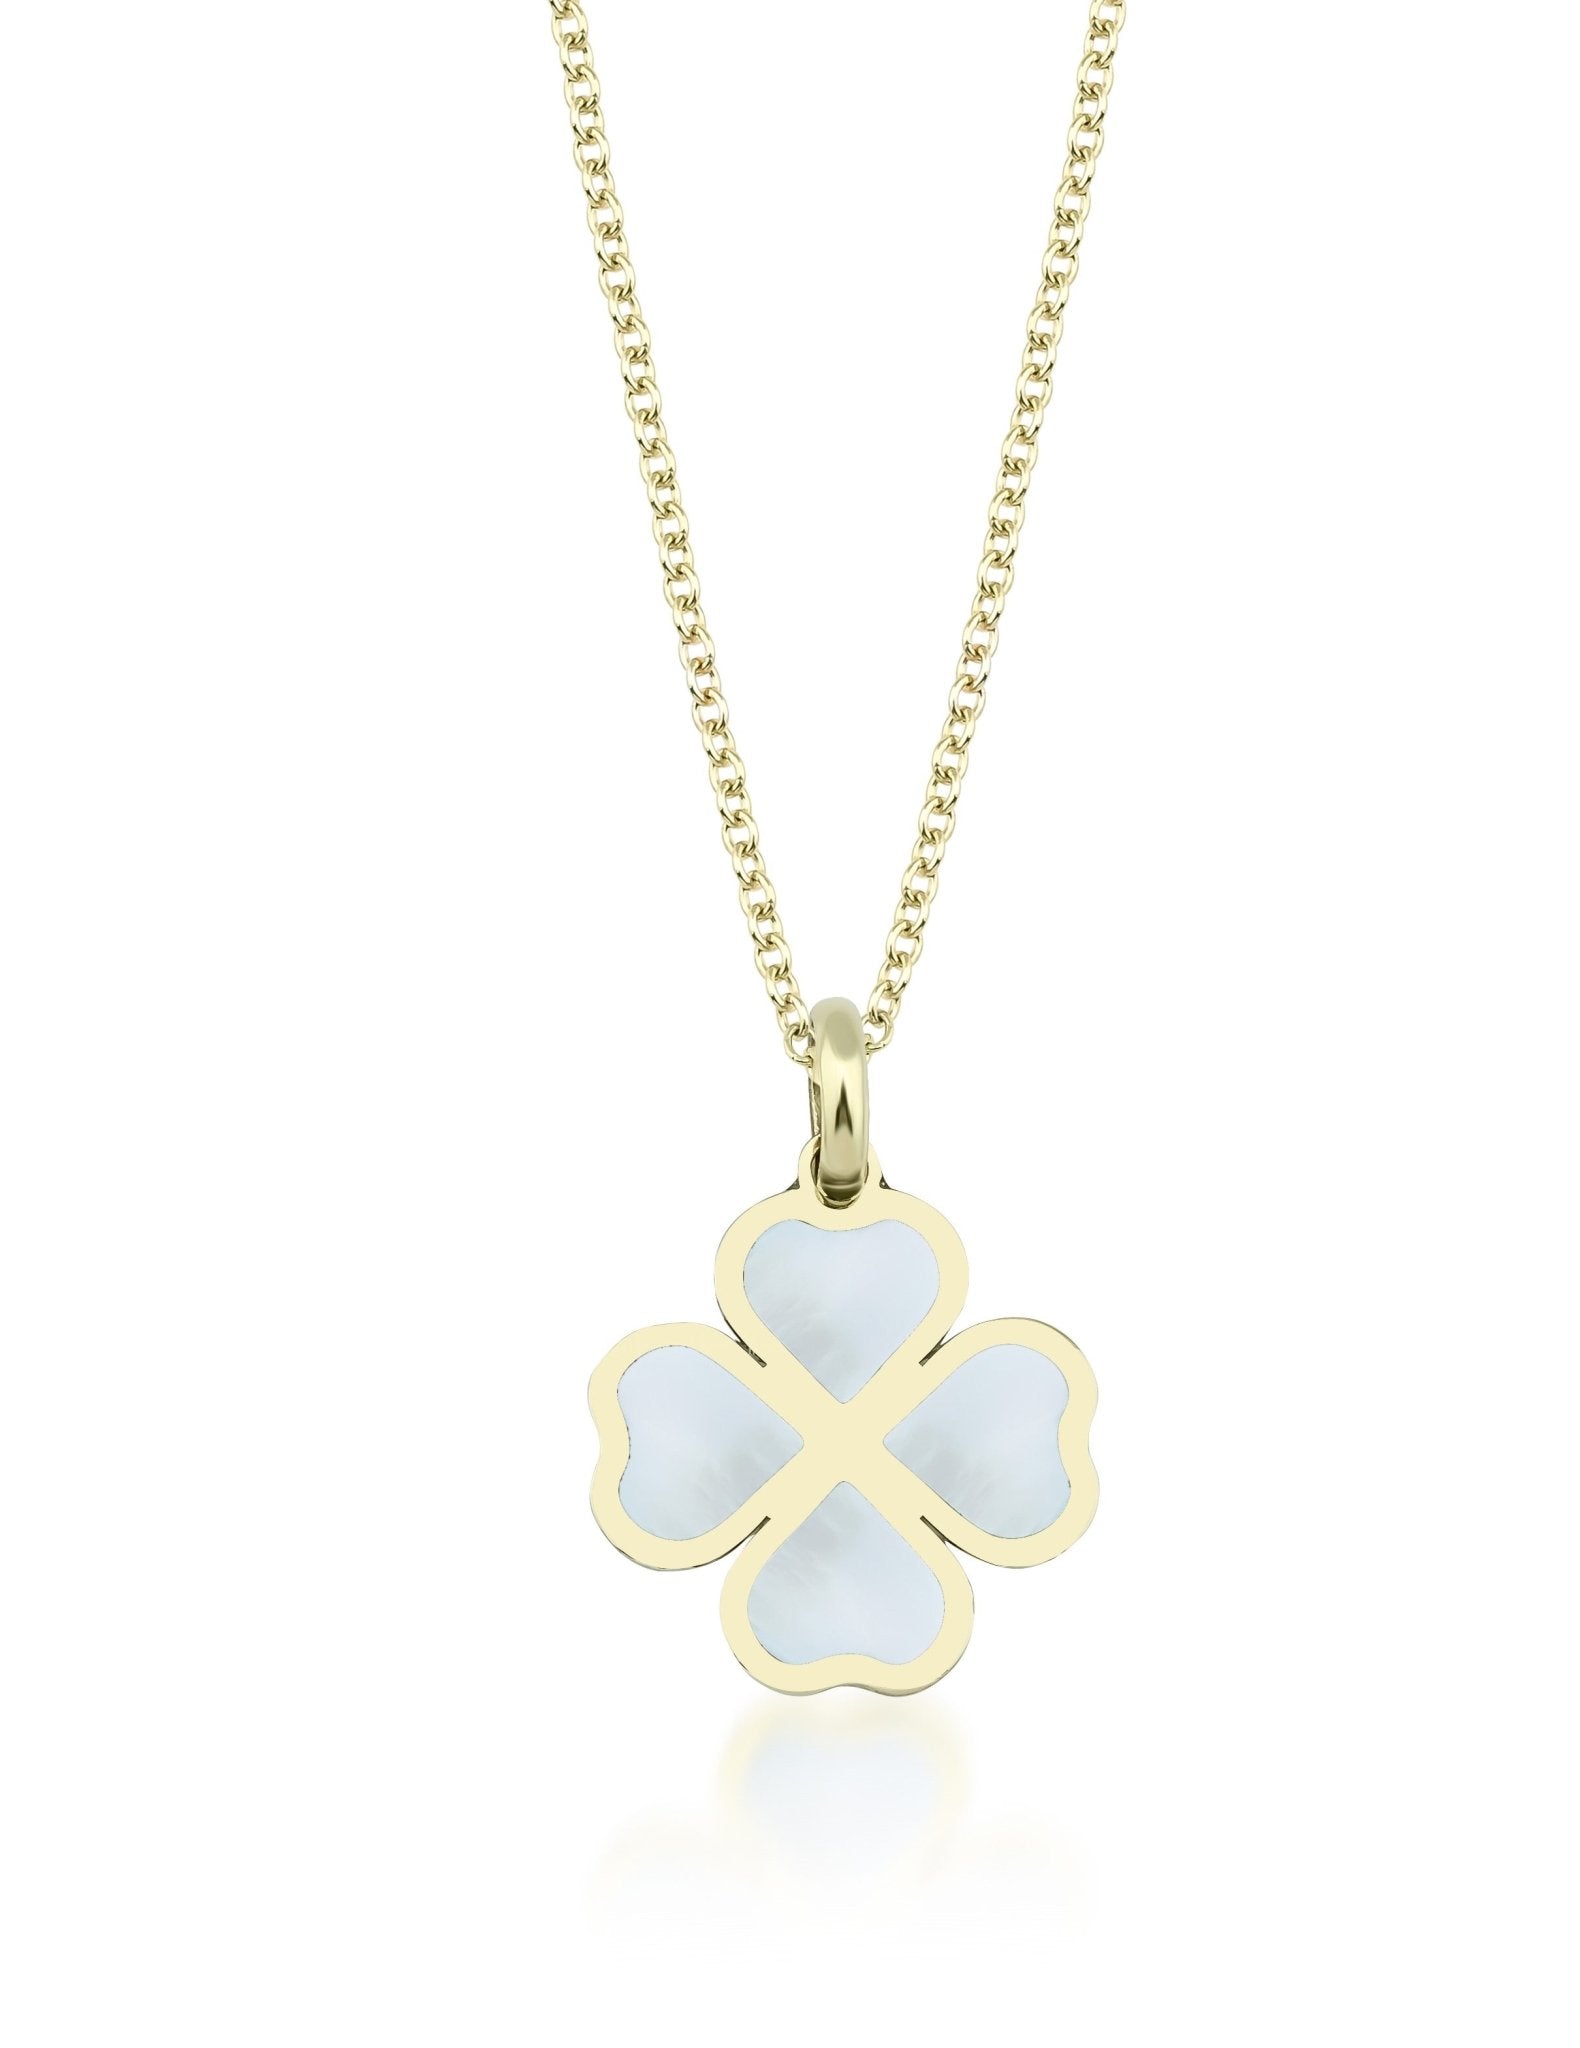 Mother-of-Pearl Micro Paved Clover 14k Gold Filled Adjustable